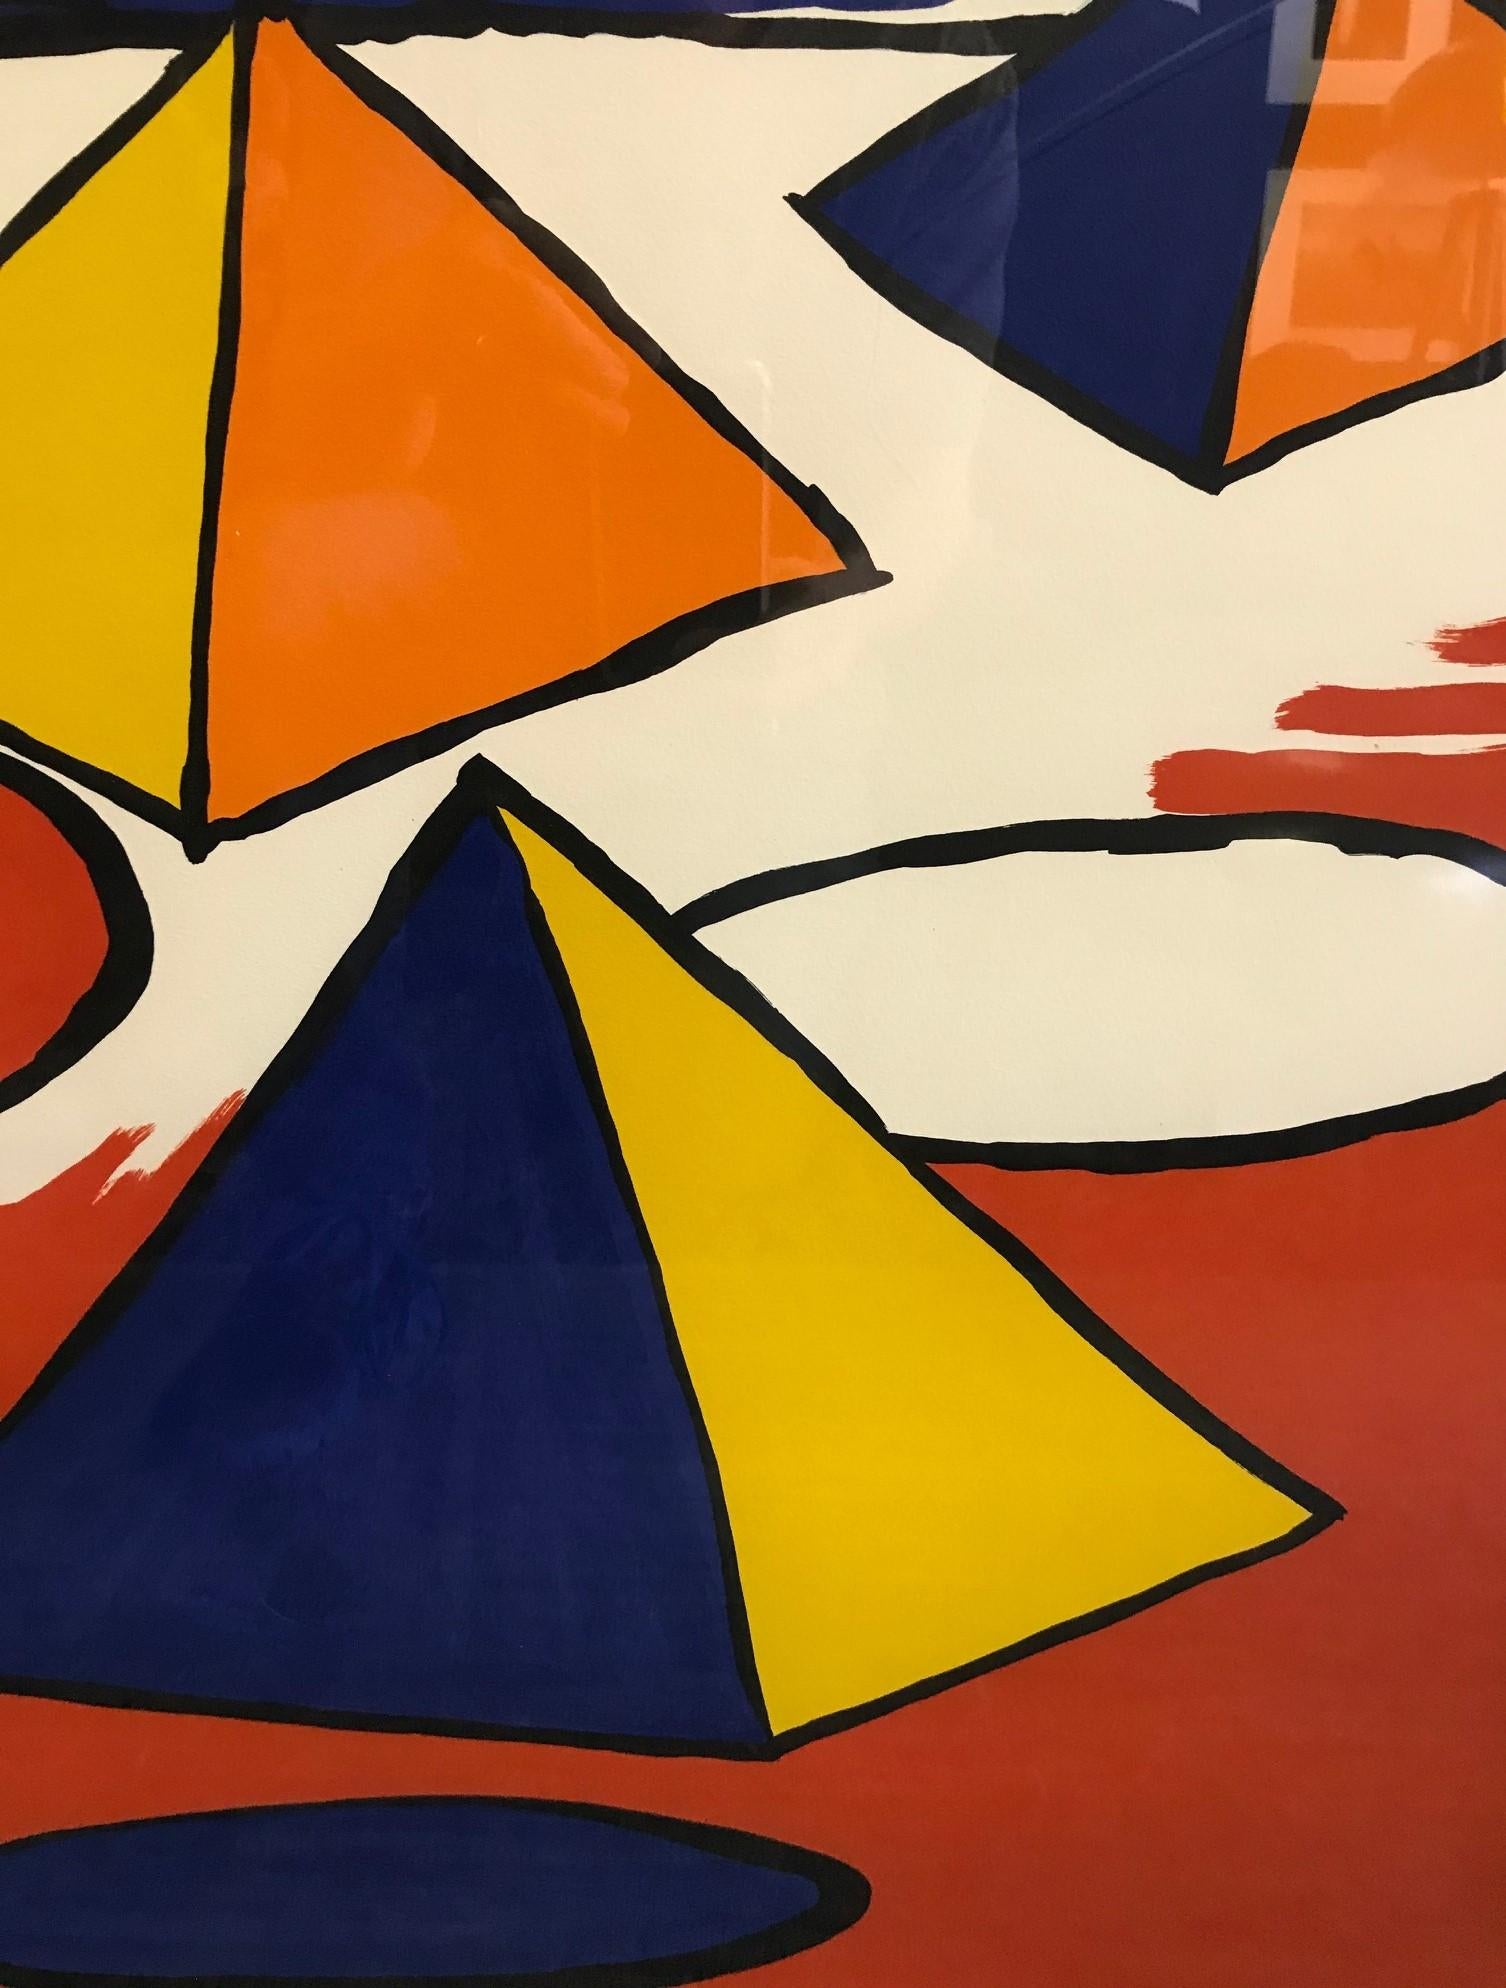 A beautiful and highly sought after image by famed American artist Alexander Calder often referred to as 